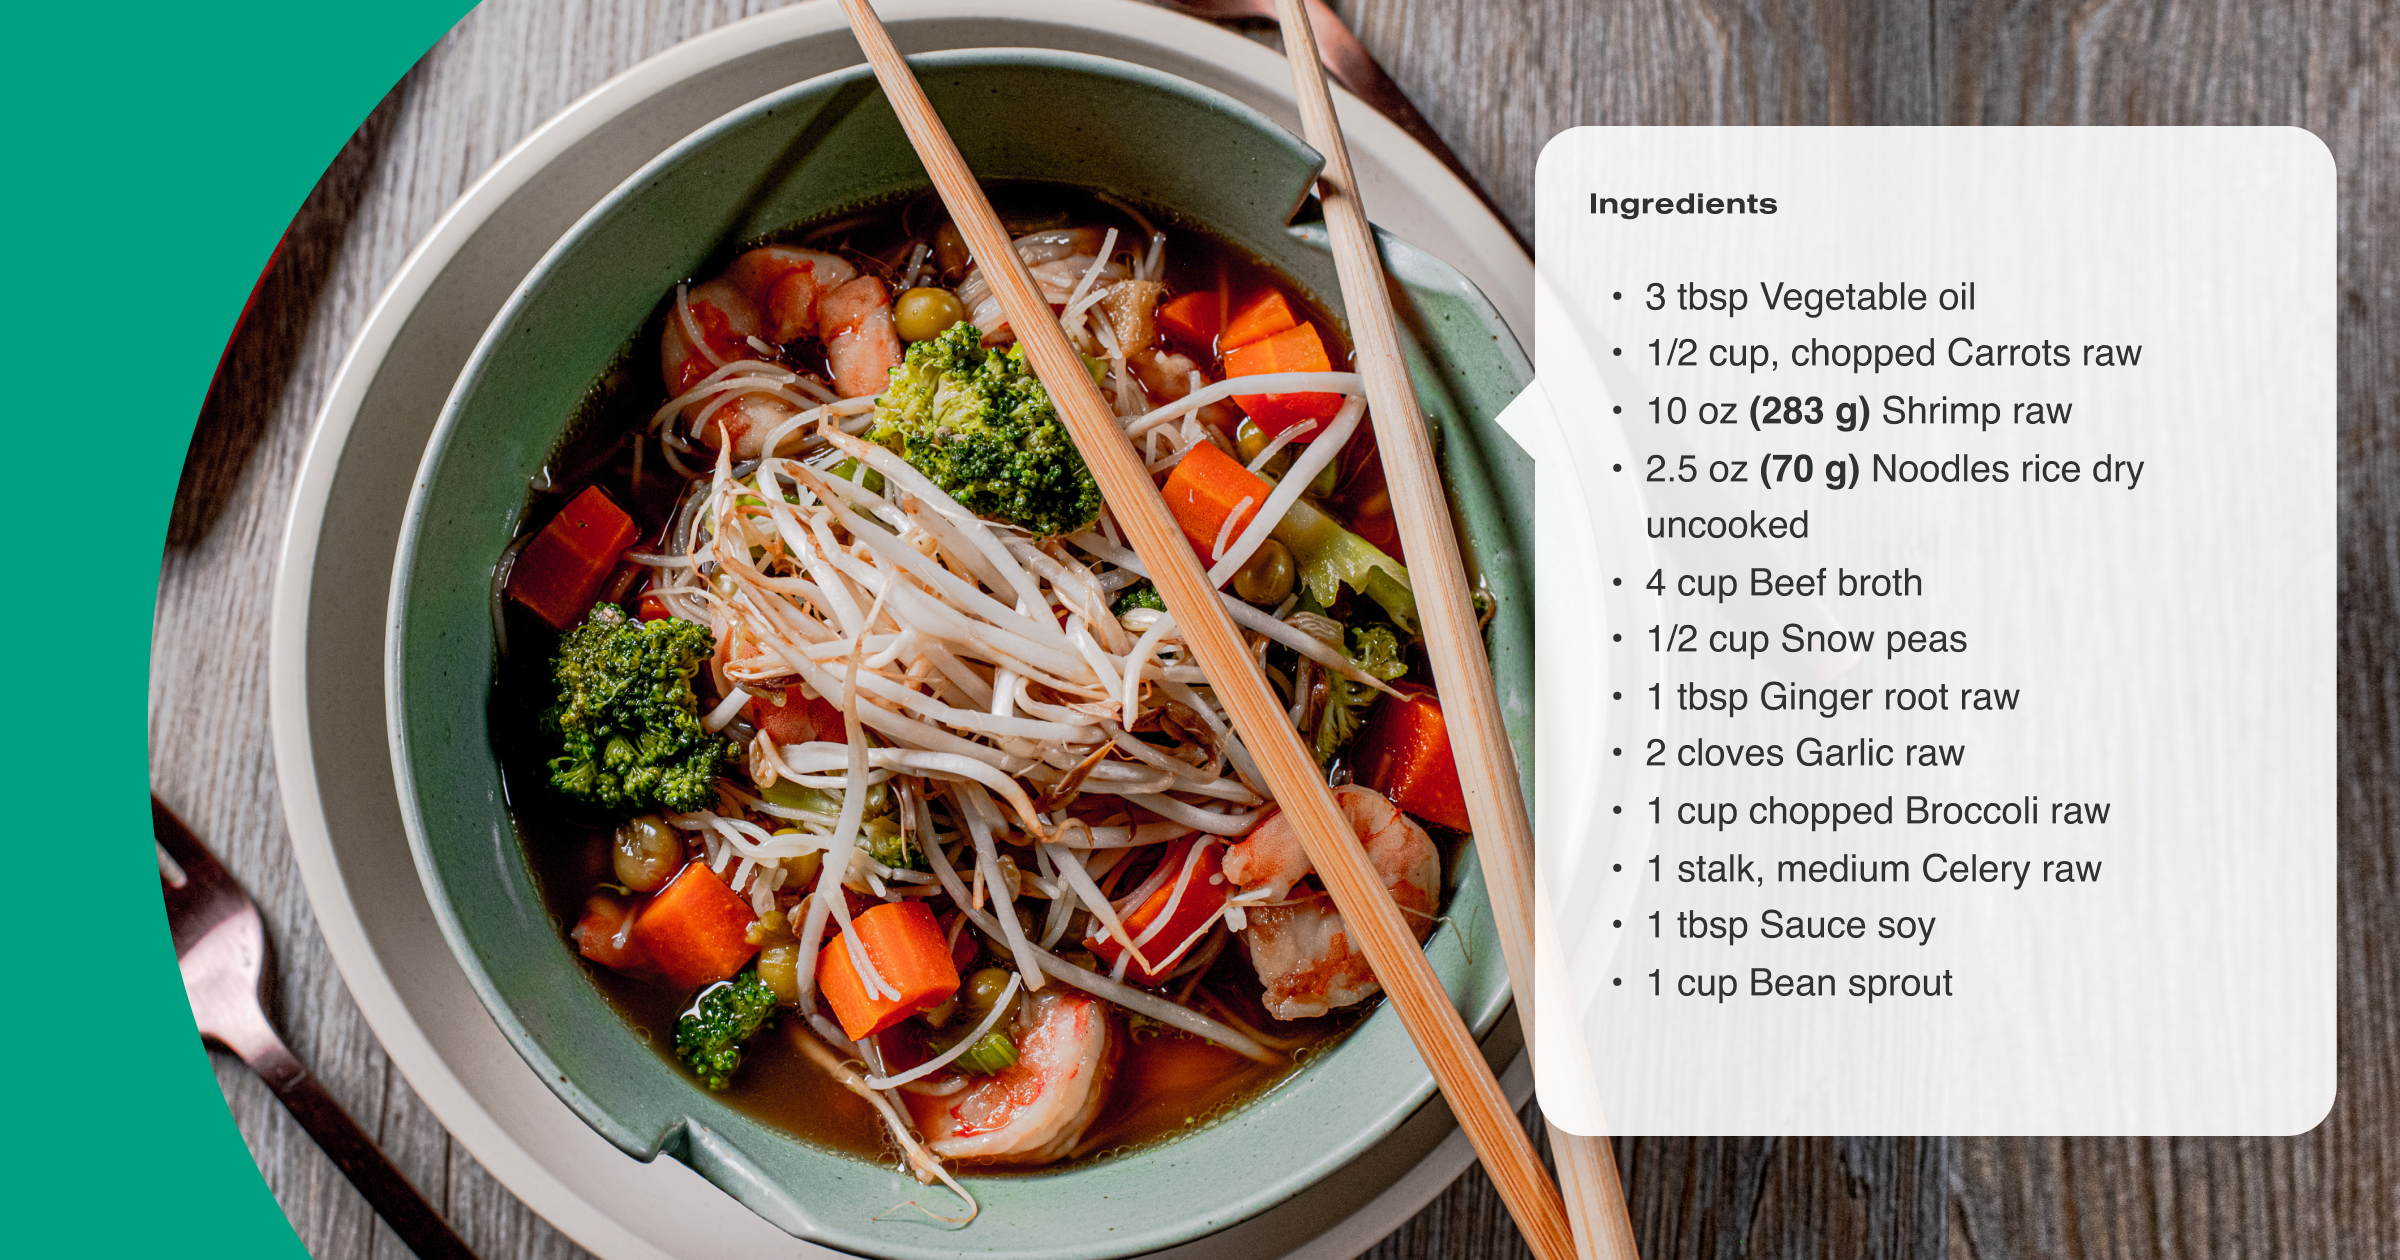 An image of a noodle soup recipe showing metric units beside weighted ingredients.